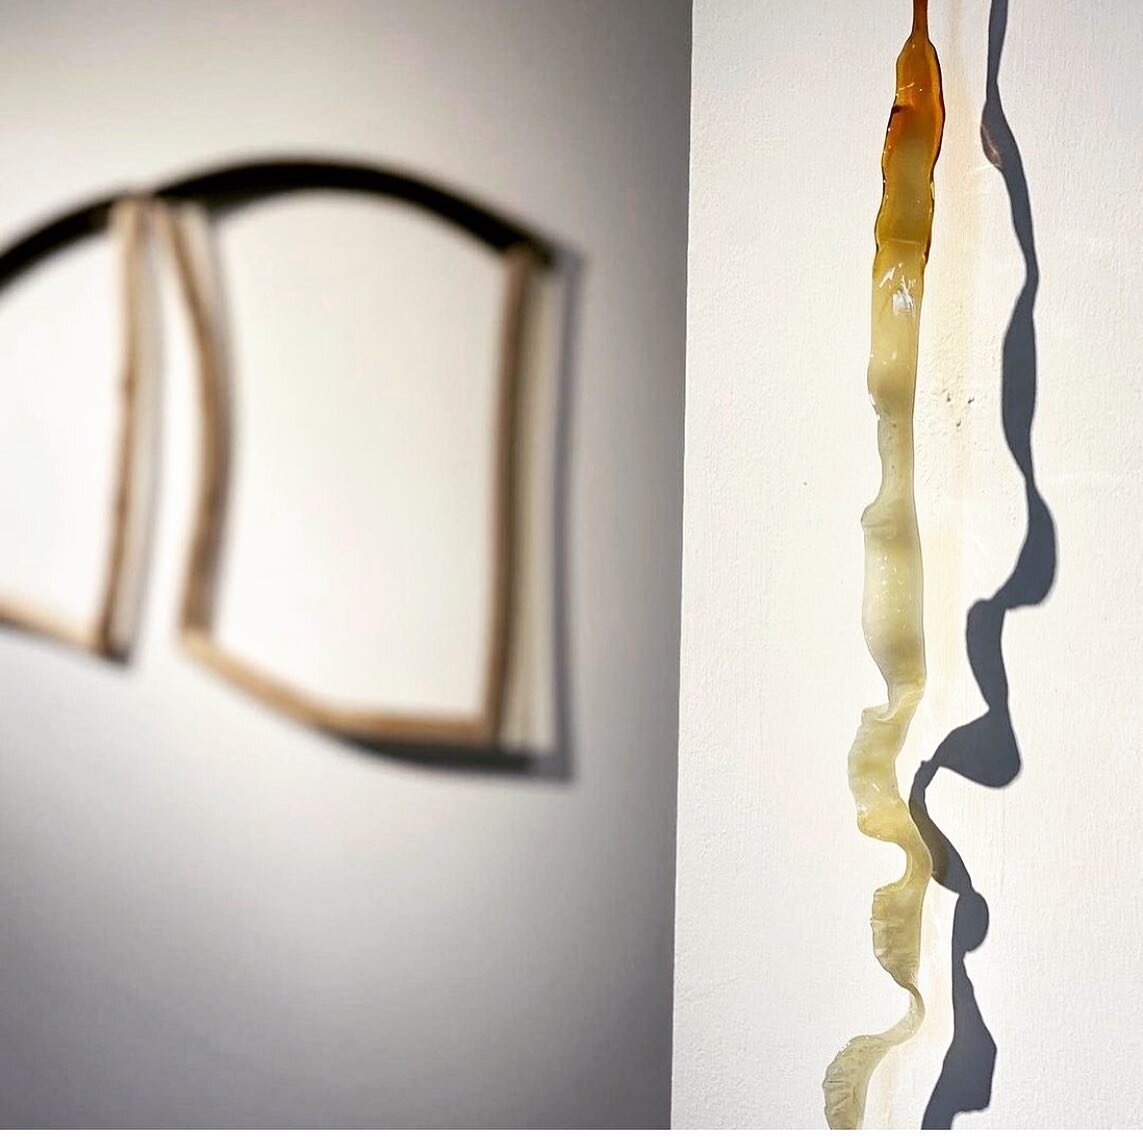 BEYOND EDGES with
@sharonadamsart and @nicolanemec will be in the
Georgian Gallery at Ards Arts Centre 8 September to 22 October.
Opening event Thursday 8 September 7-9pm.
Hope you can join us #artandlandscape #artandplace #womenartists #glass #sculp